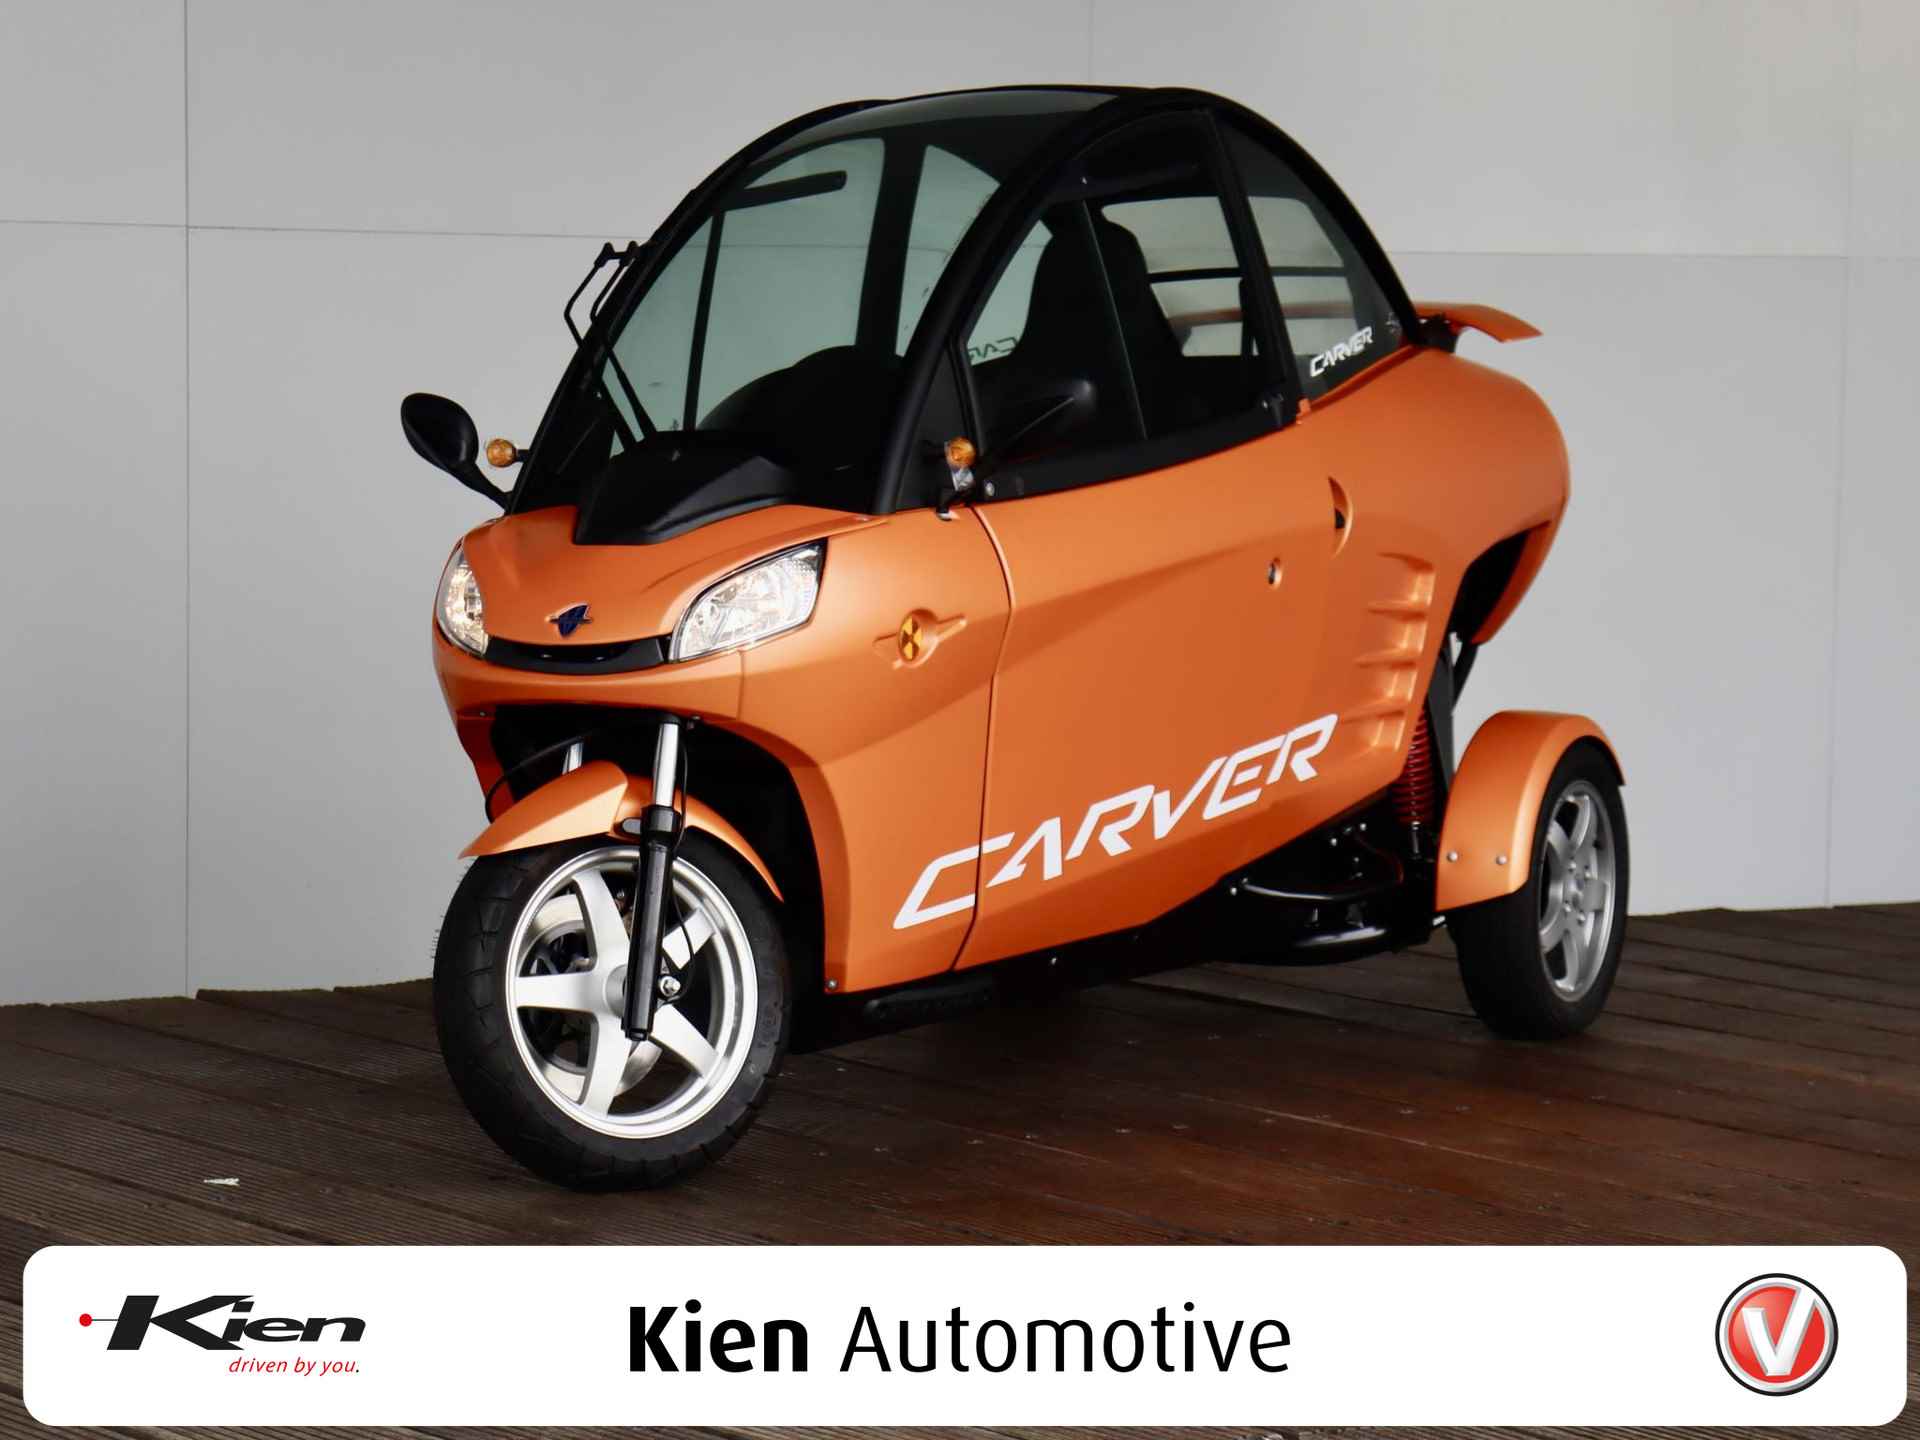 Carver 7.1 kWh S+ | 80 KM| 100% Electric | Bluetooth | Soft top | - 1/23